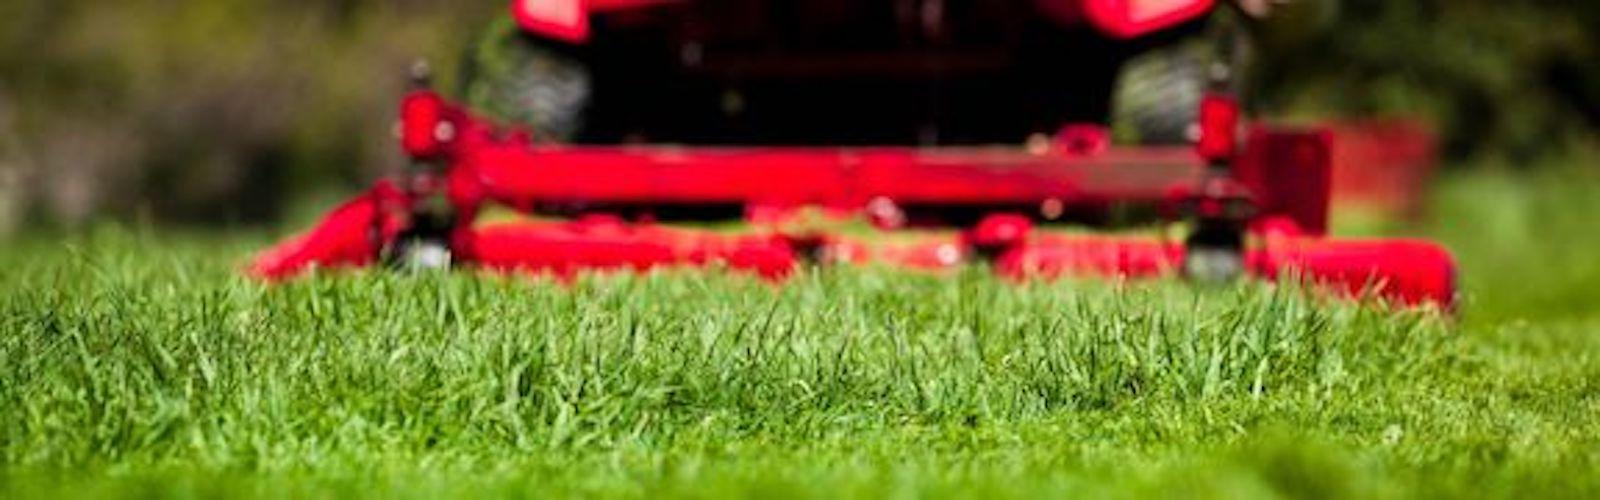 Grass with red lawn mower in the background.